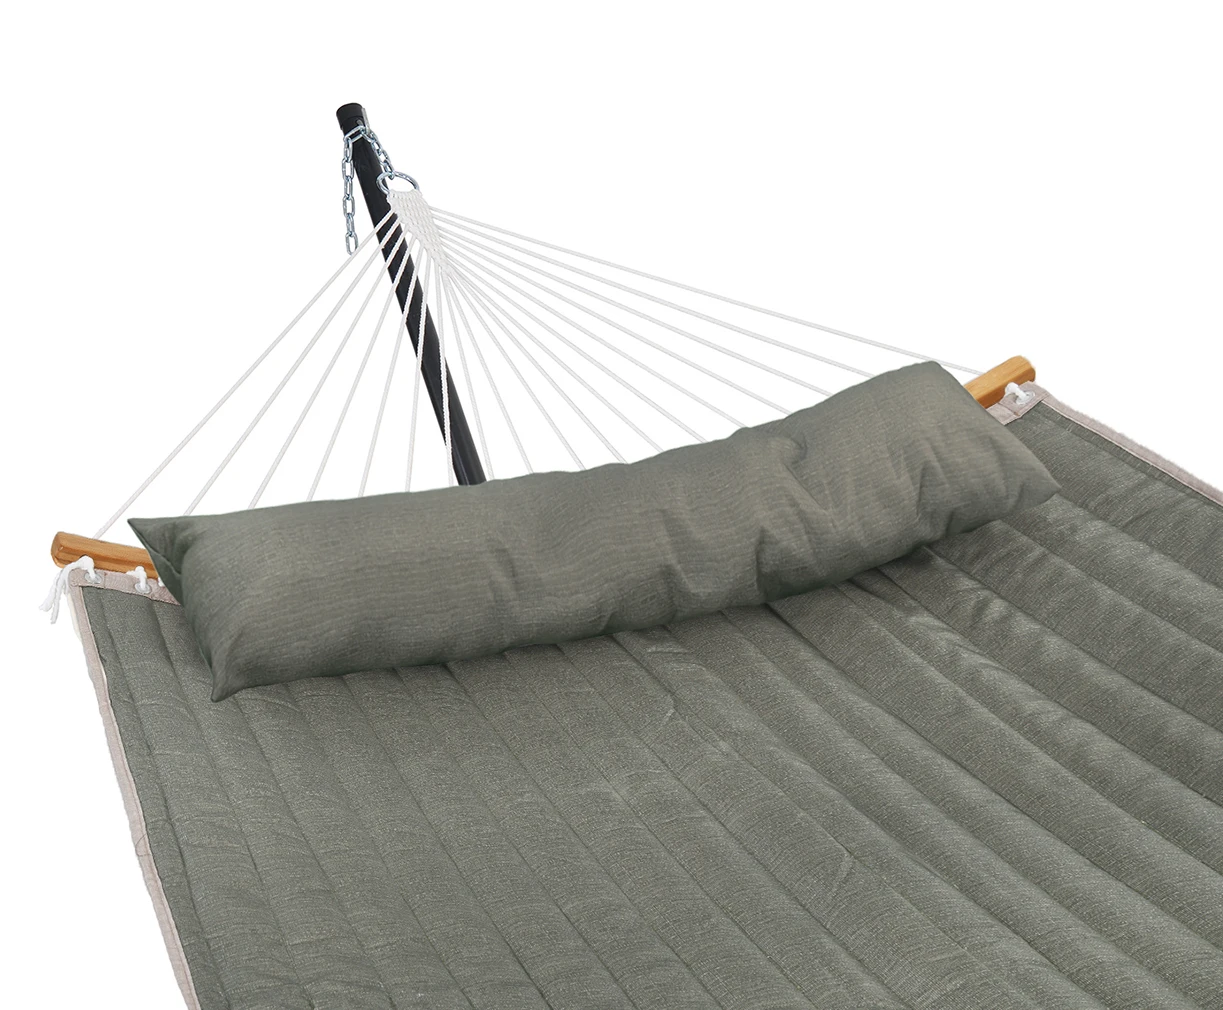 Wholesale customized hammock bed bamboo bend patio garden swing with pillow outdoor hanging Quilted hammock